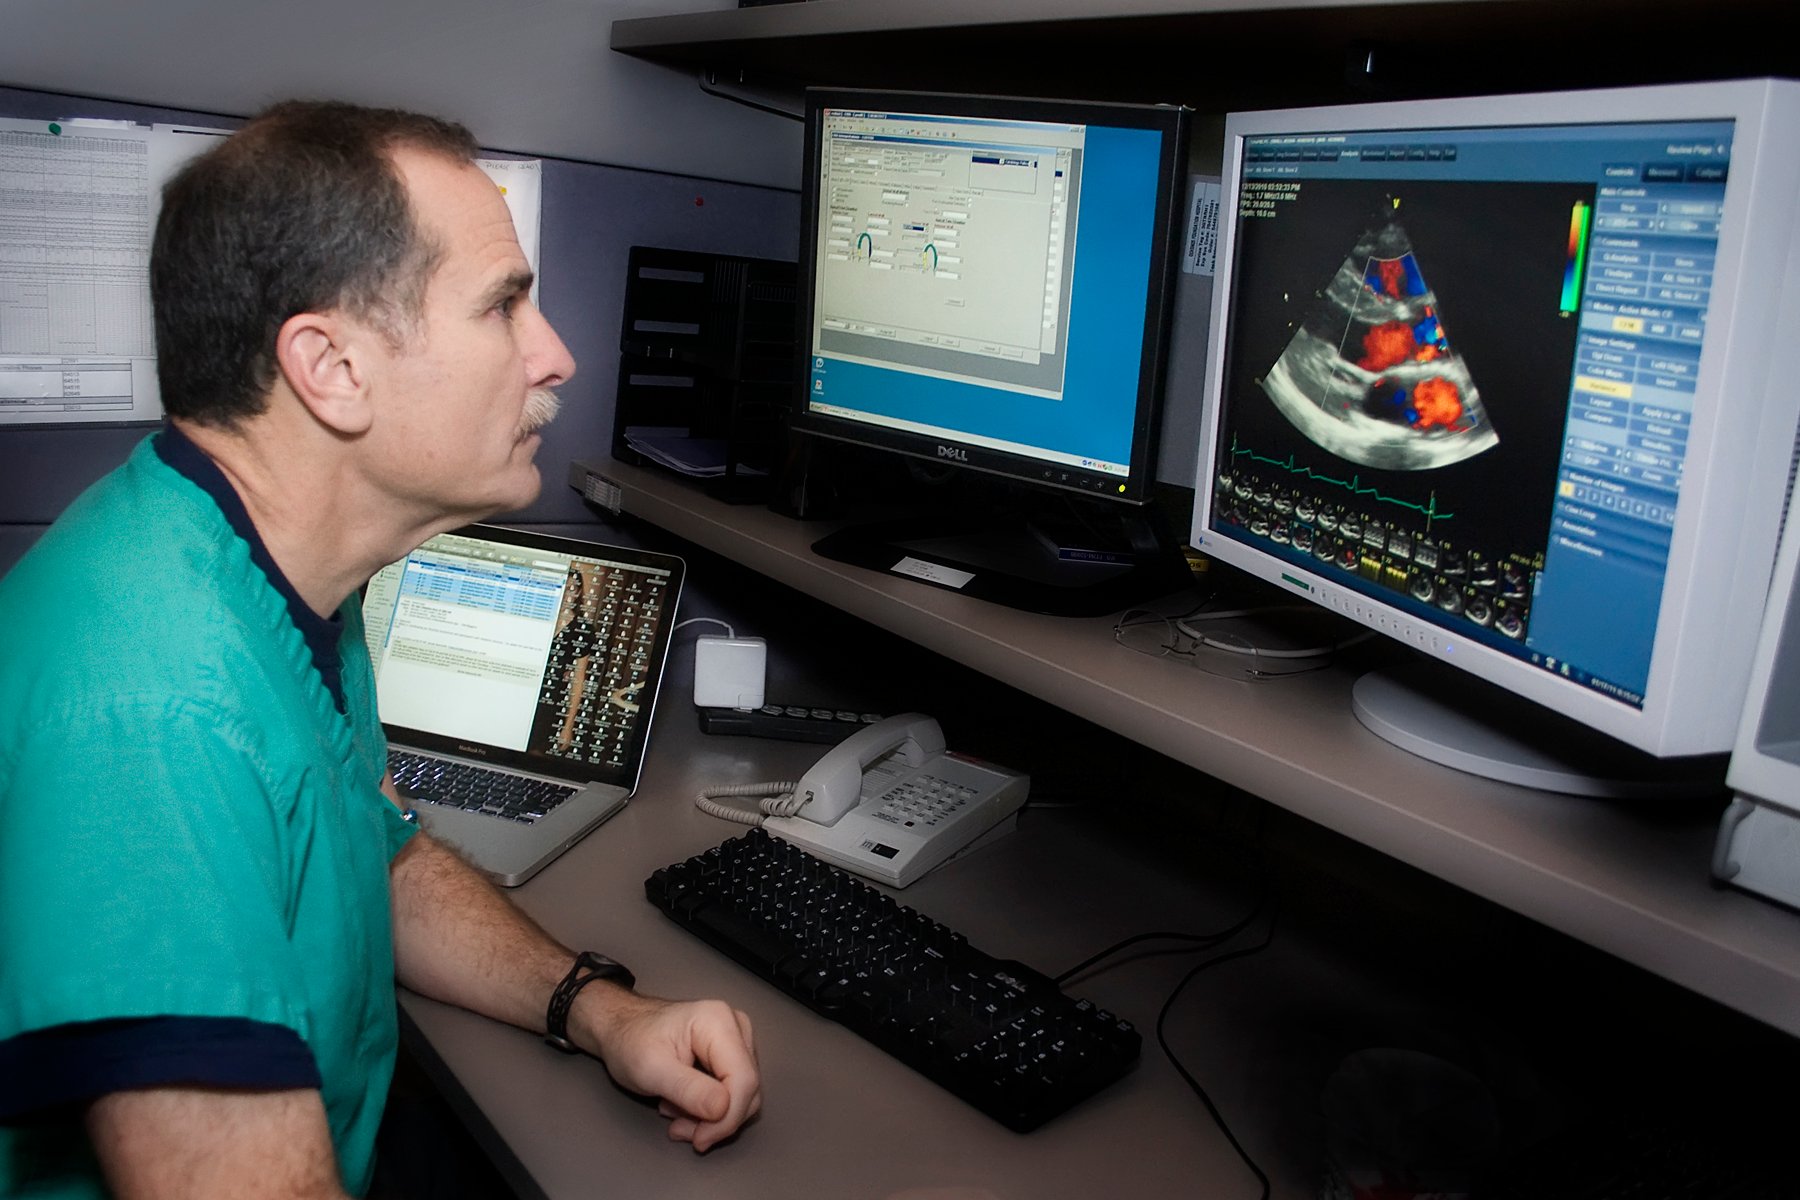 Cardiac Ultra Sound Echo ASE Choosing Wisely 5 THings Patients Should Question